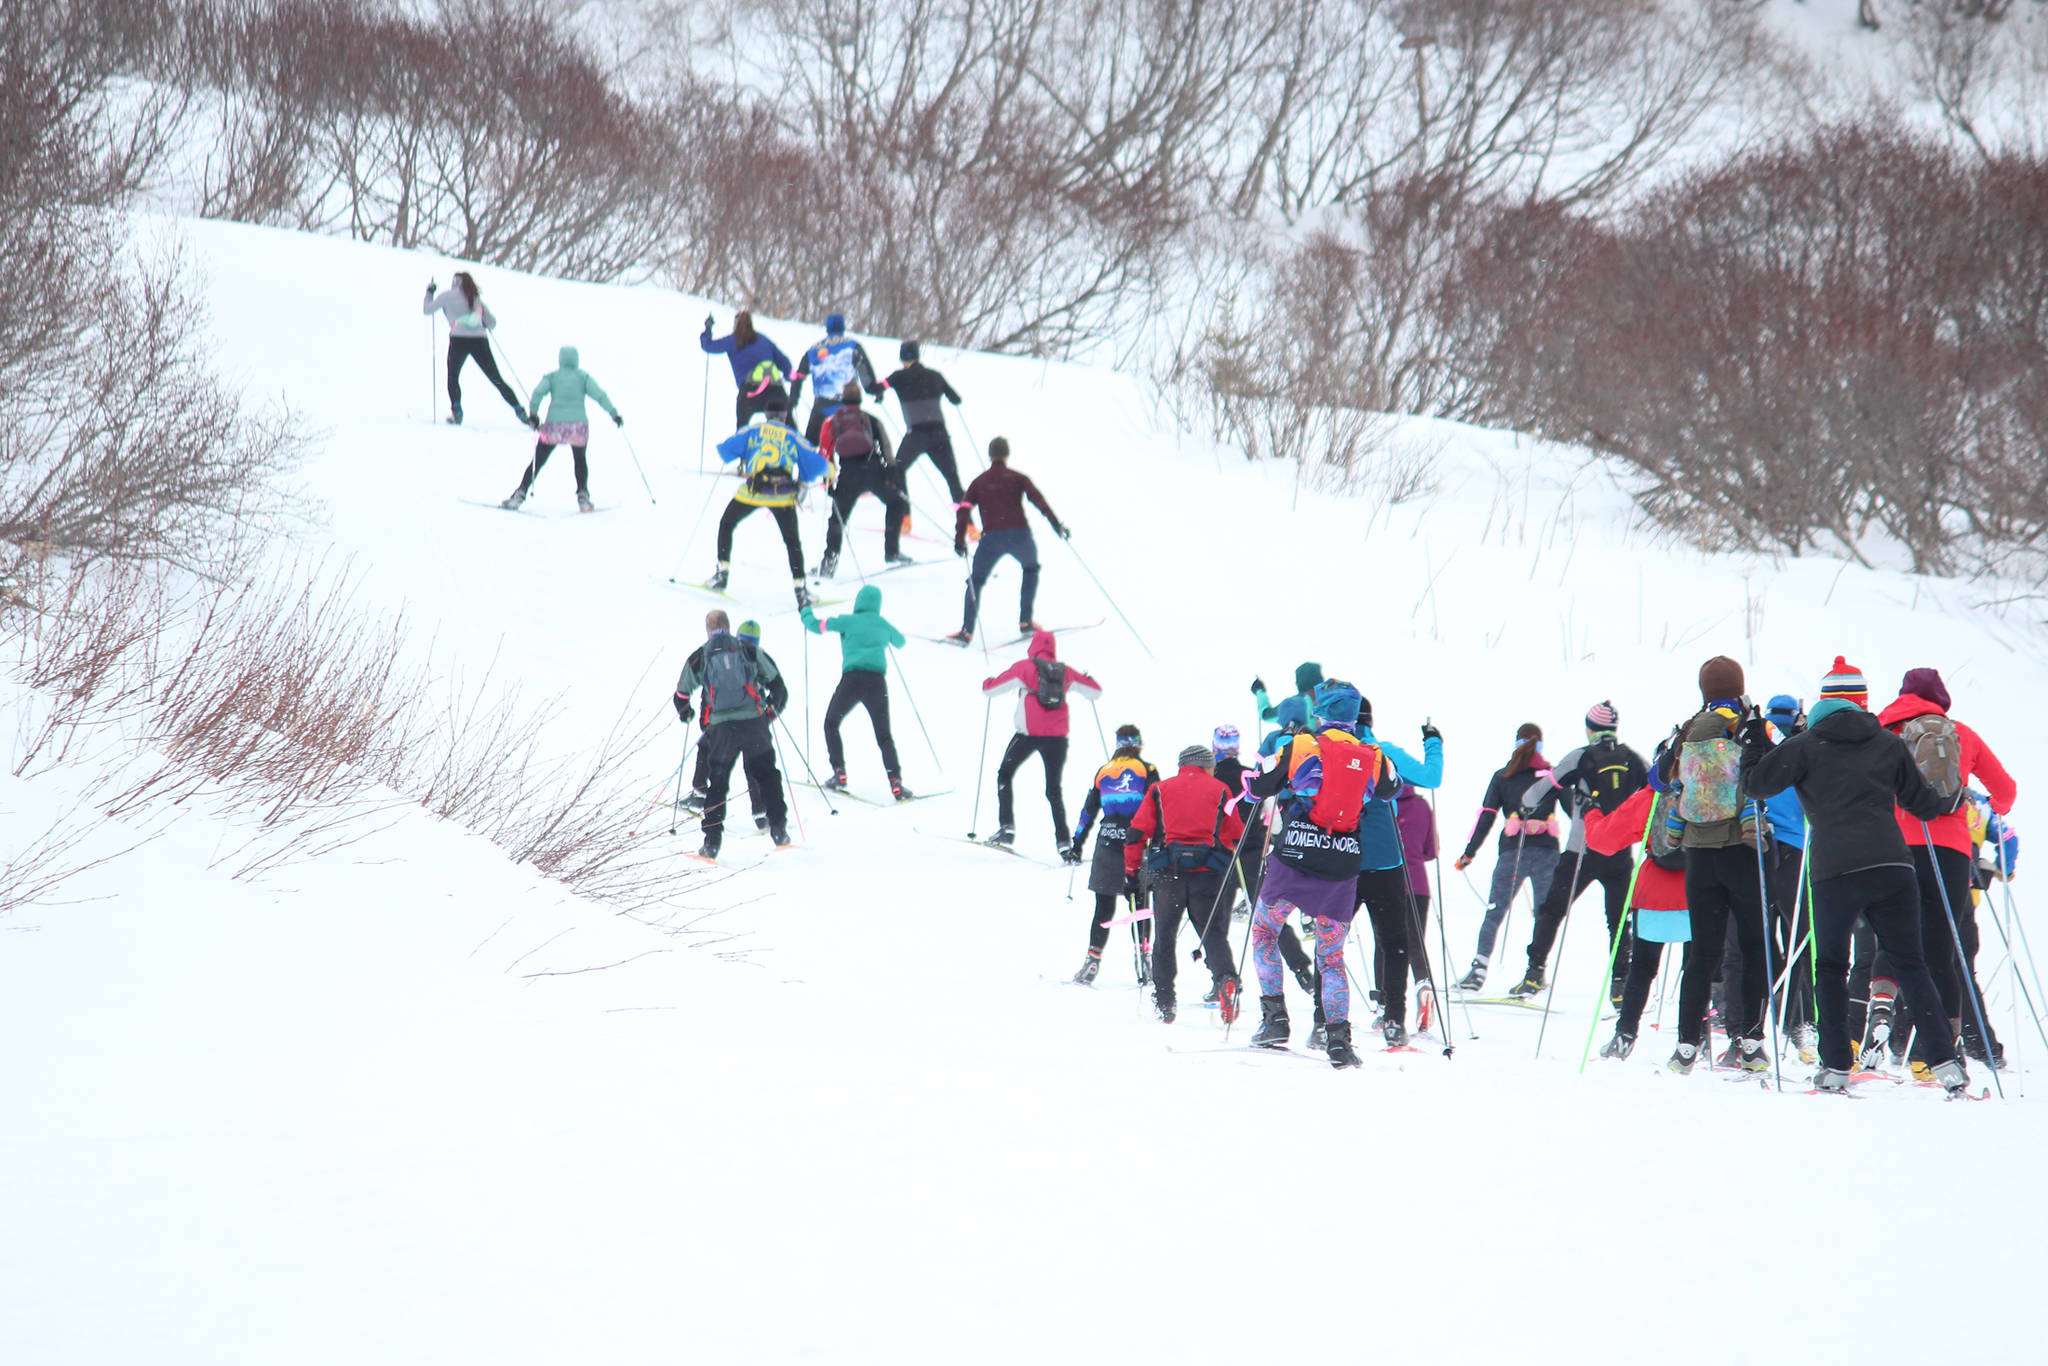 Participants in the 25 kilometer portion of the Kachemak Nordic Ski Marathon take off up the first hill of the course Saturday, March 9, 2019 at the Lookout Mountain Trails near Homer, Alaska. (Photo by Megan Pacer/Homer News)